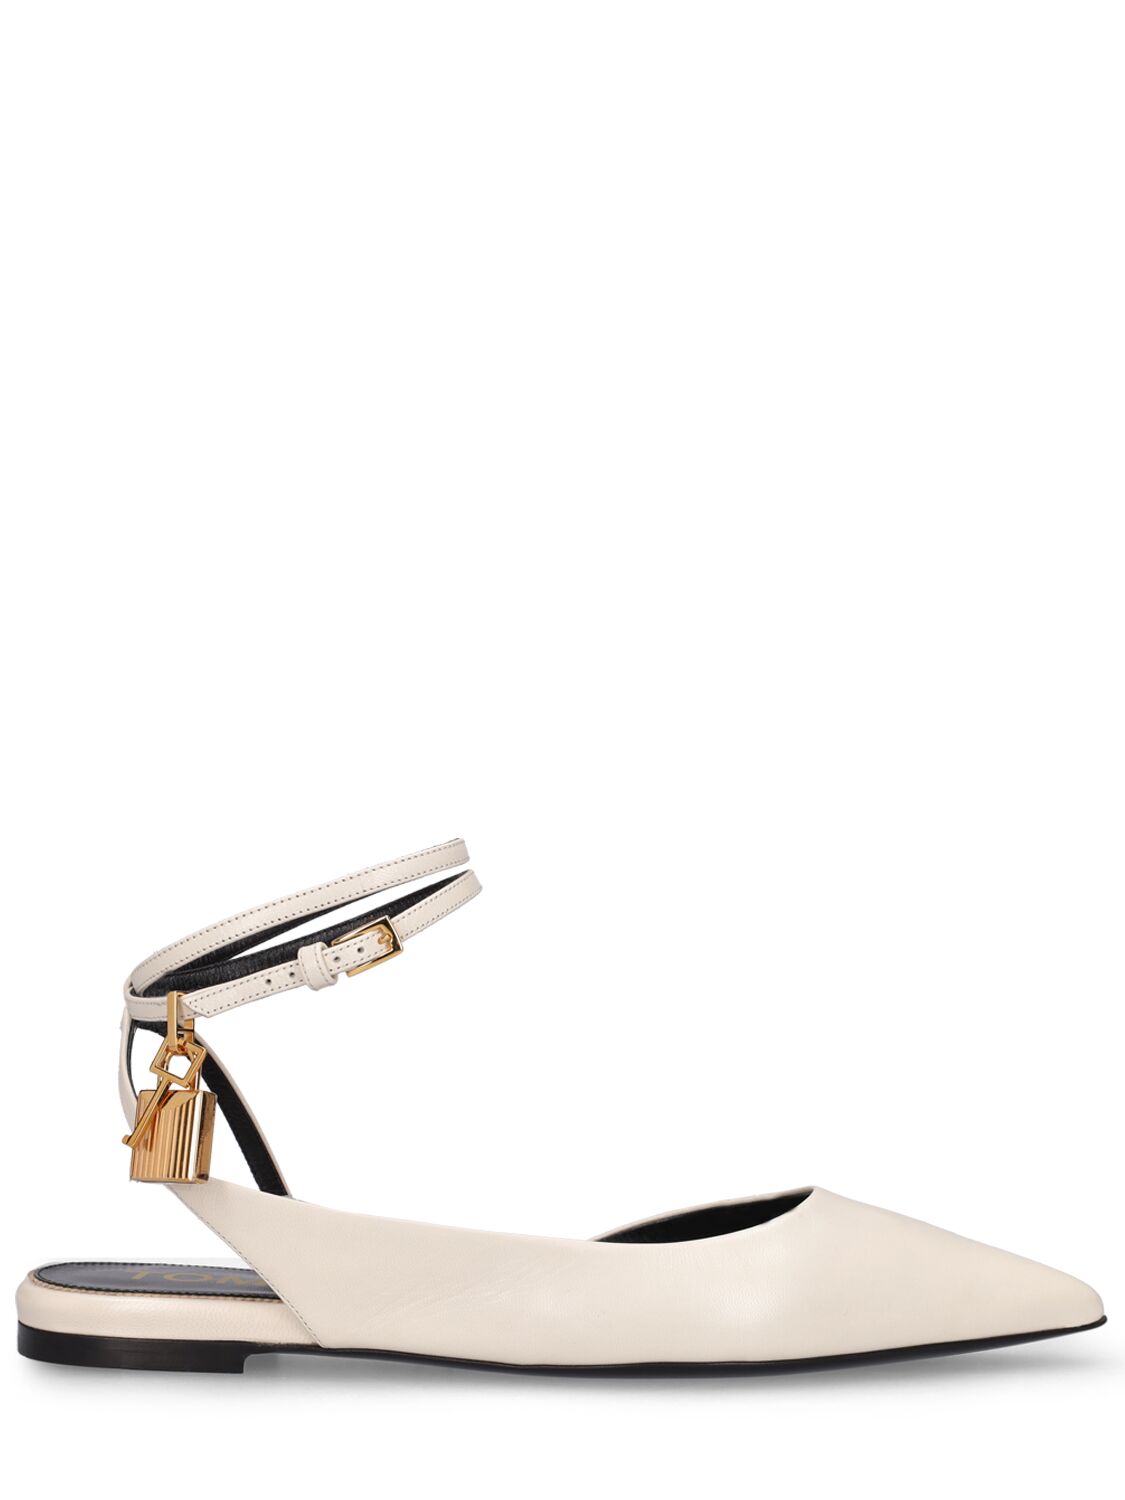 Tom Ford 5mm Padlock Leather Flats In White